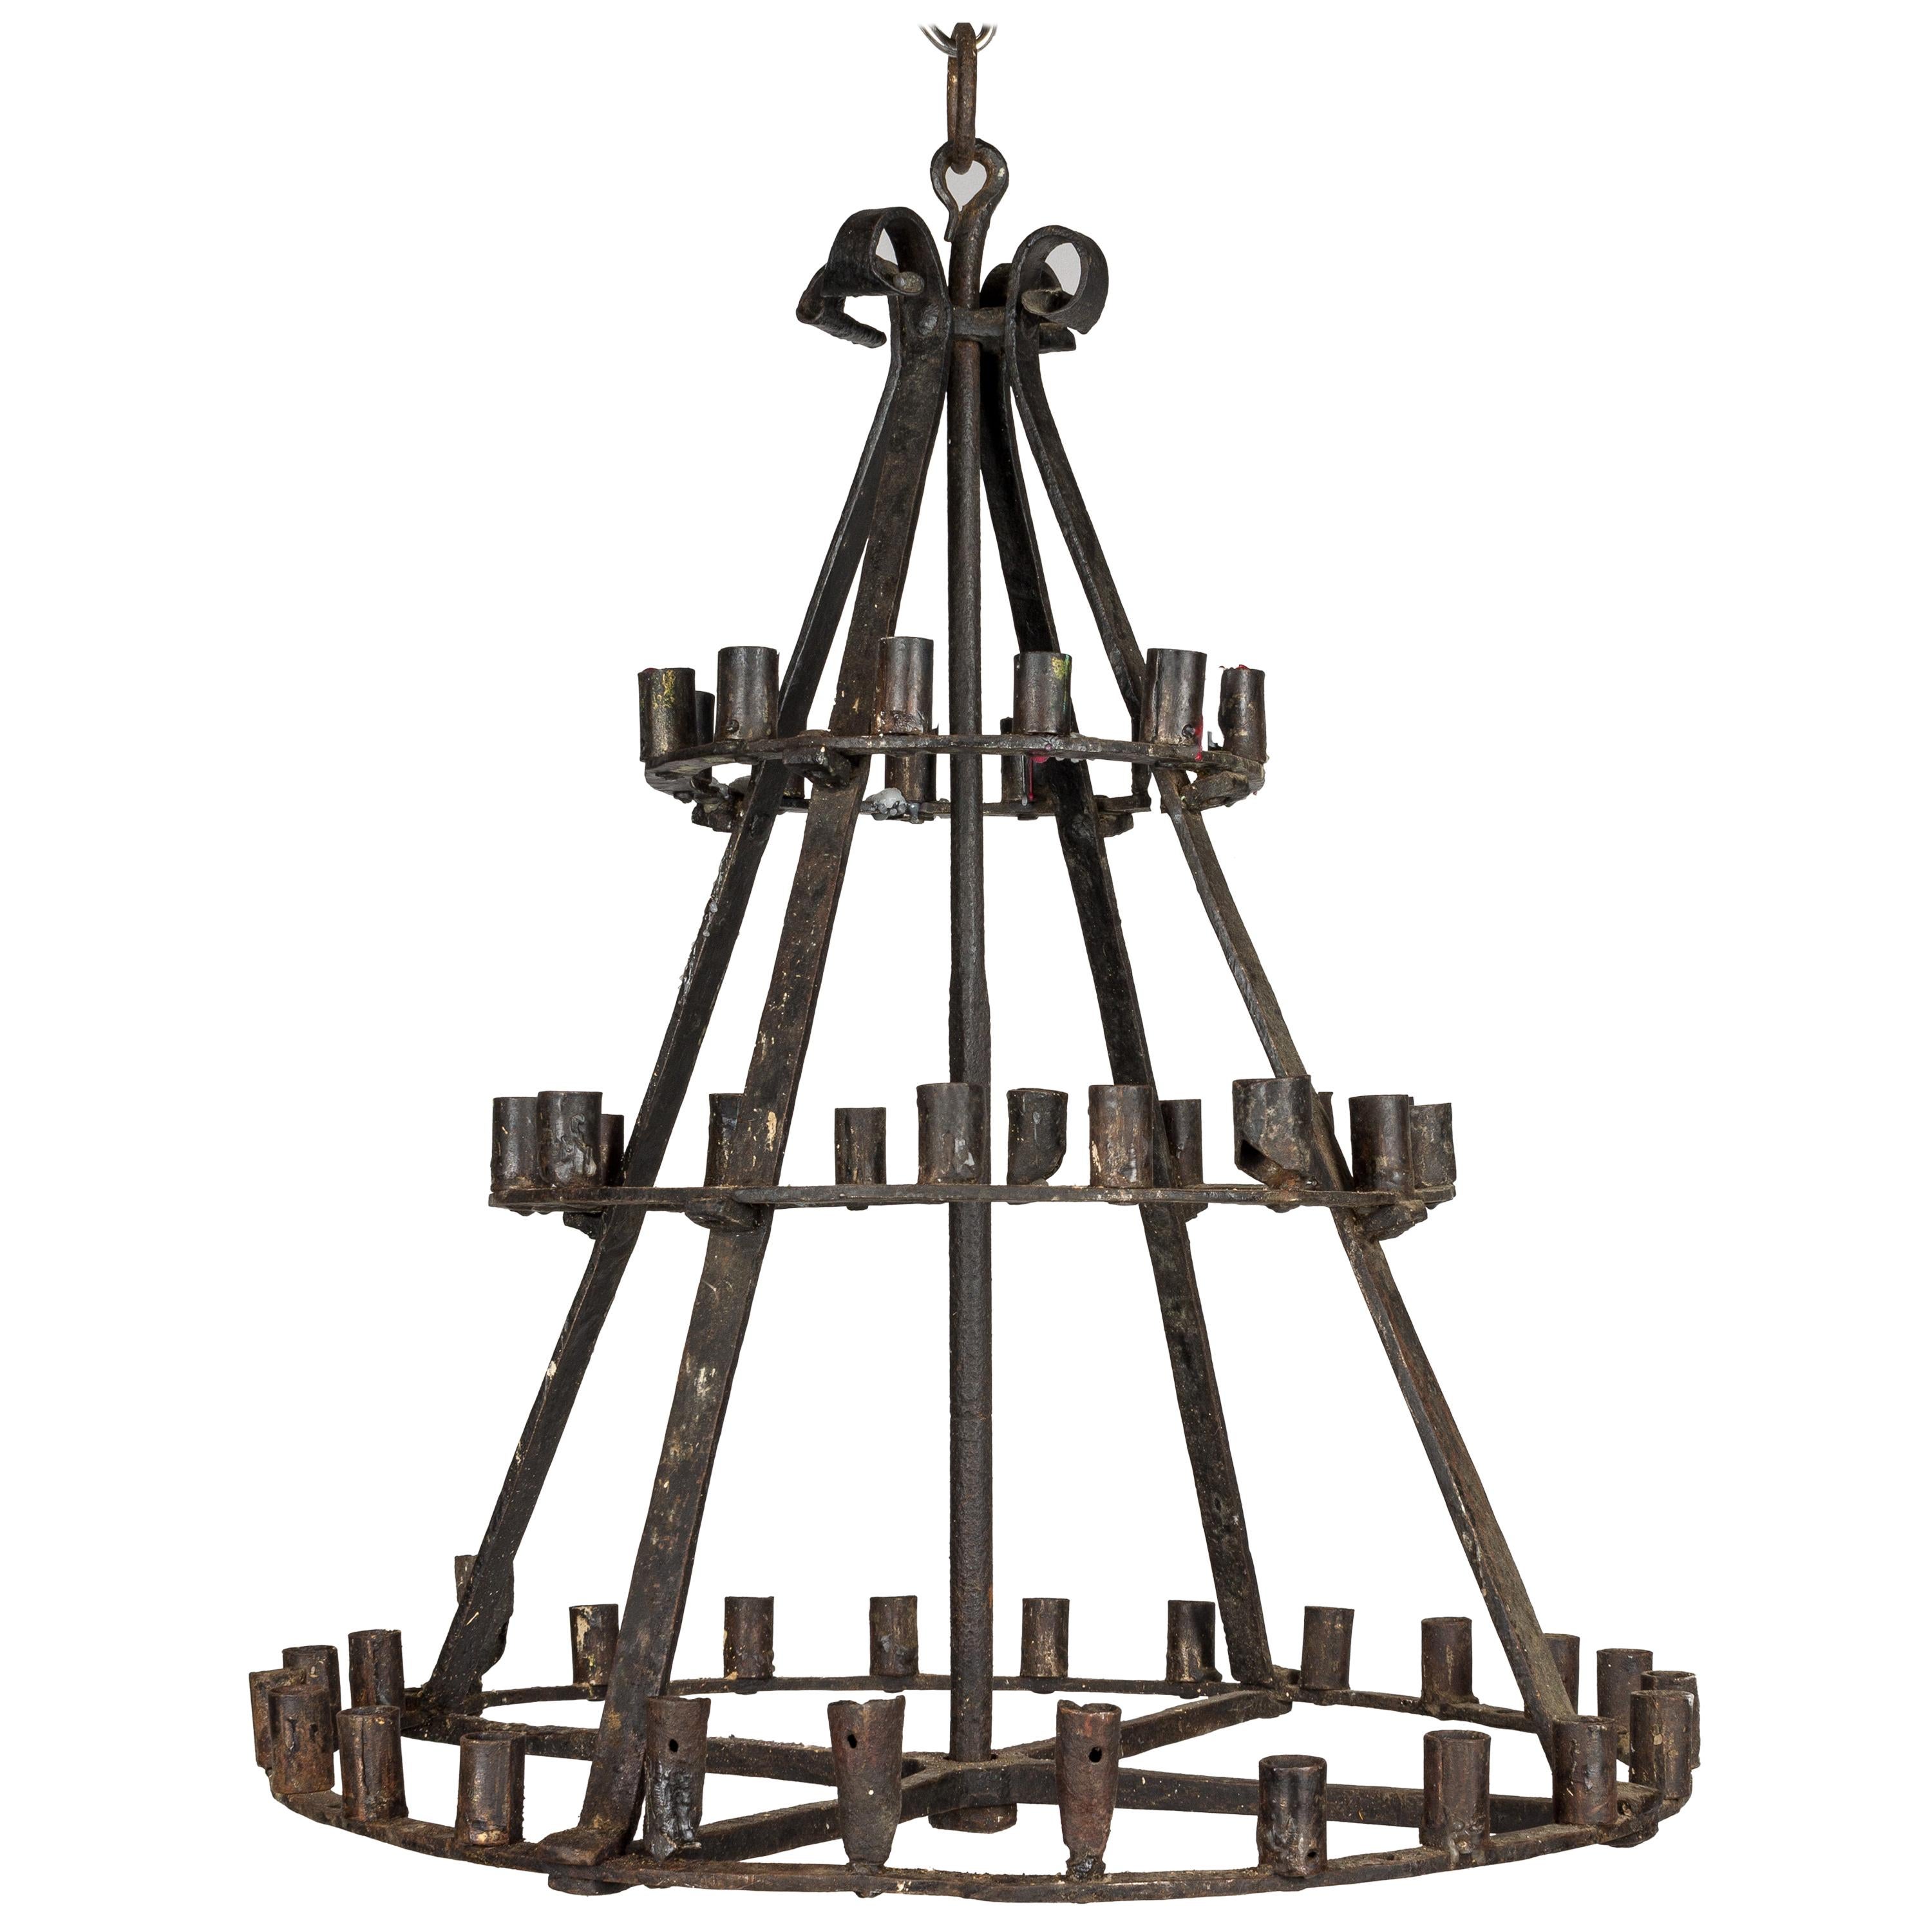 19th Century French Wrought Iron Candle Chandelier